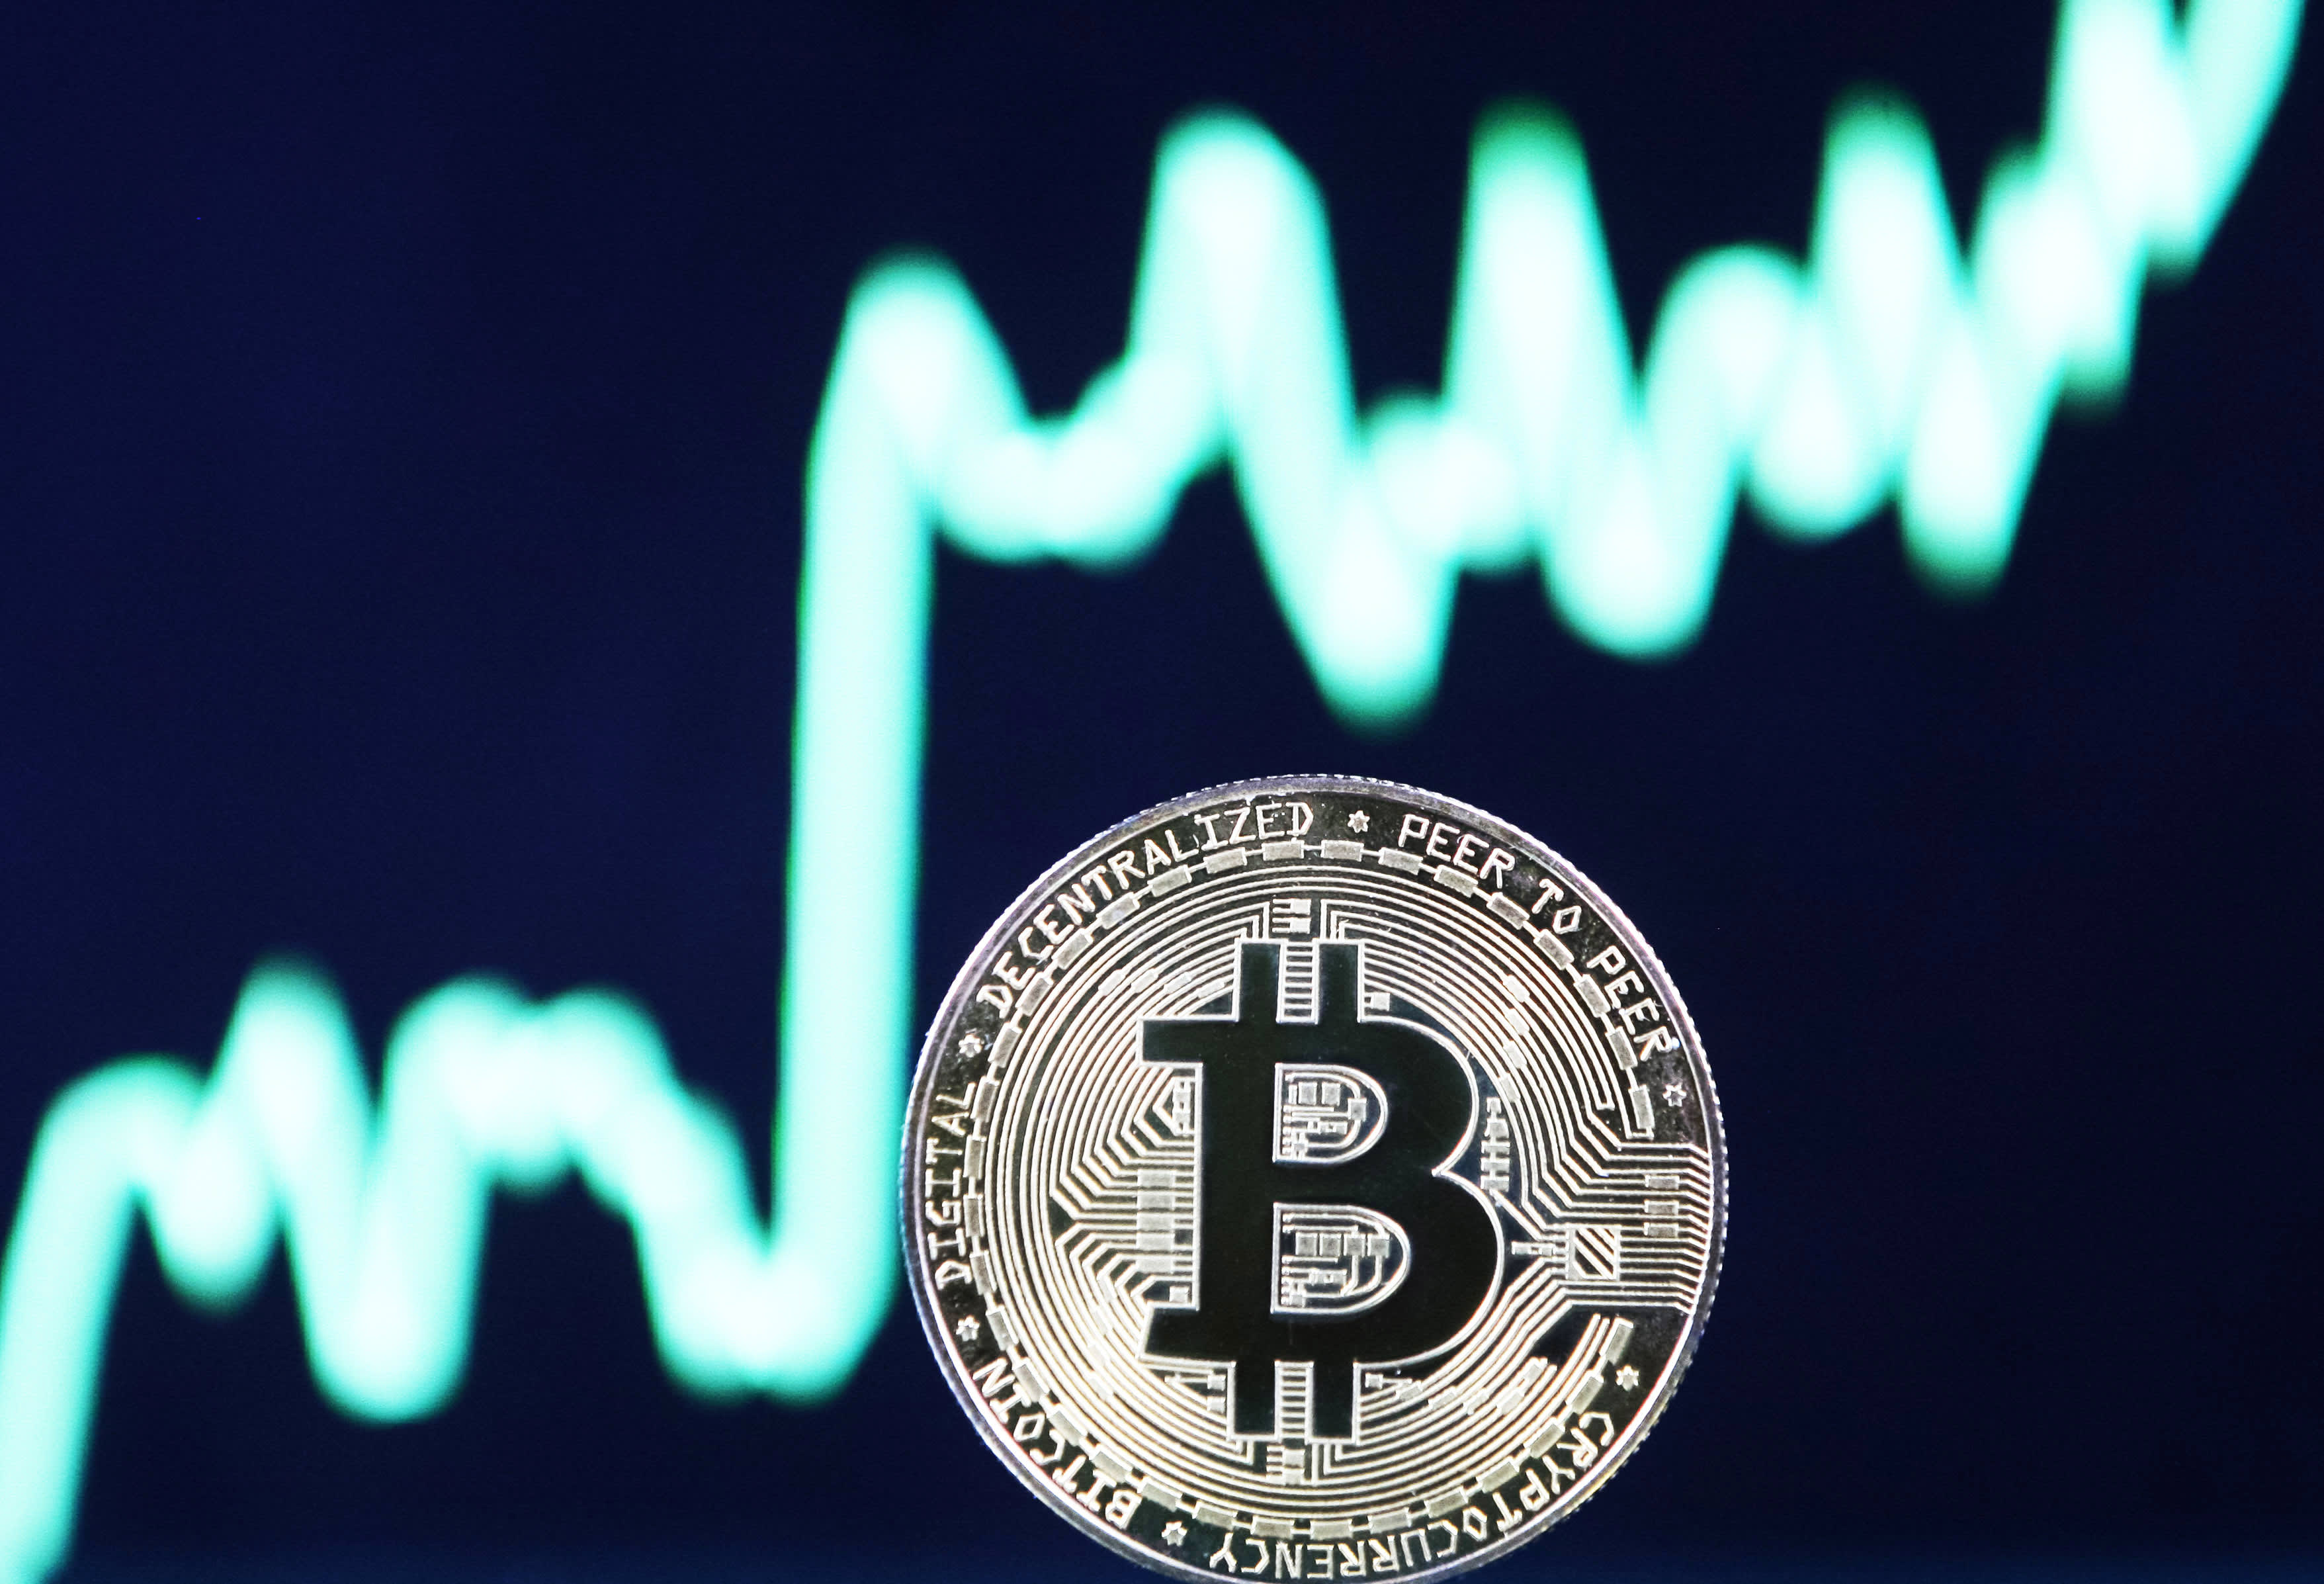 After an 80% rally for bitcoin, market experts predict where it's going next in 2023